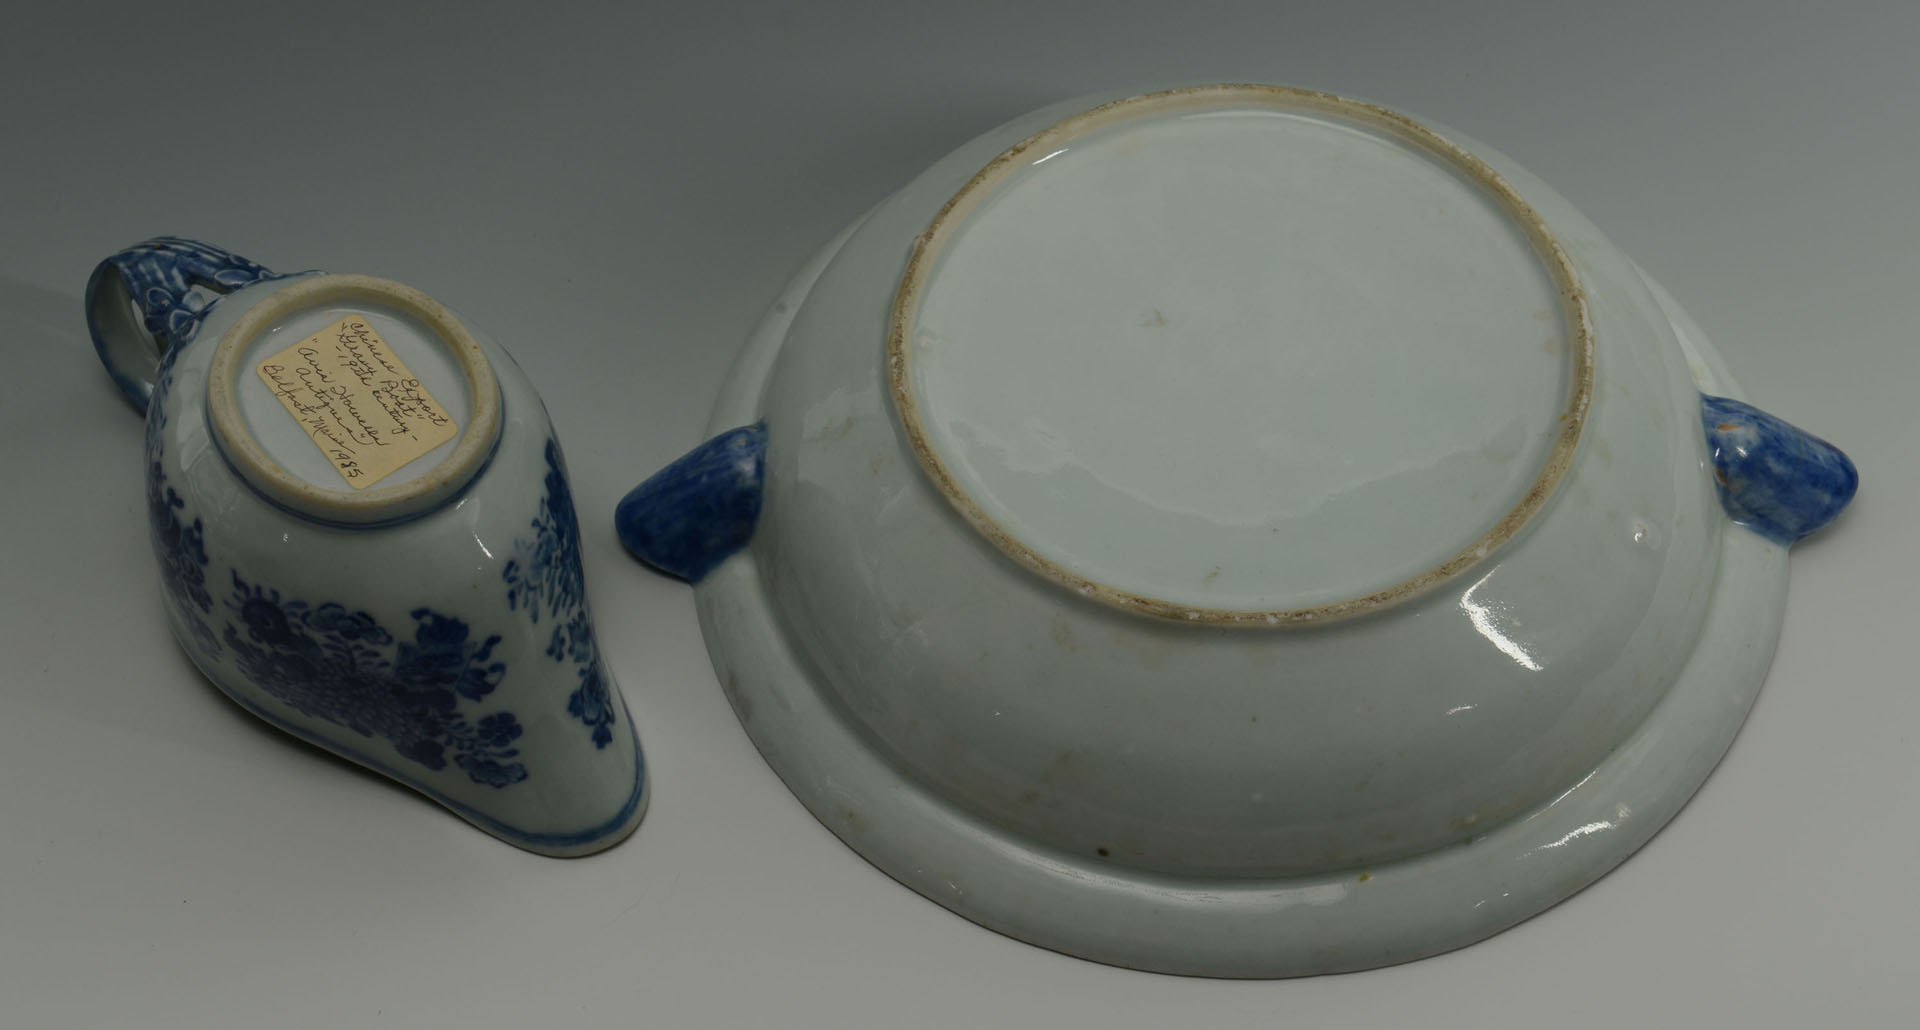 Lot 21: 3 Chinese Export Porcelain Blue Fitzhugh Items